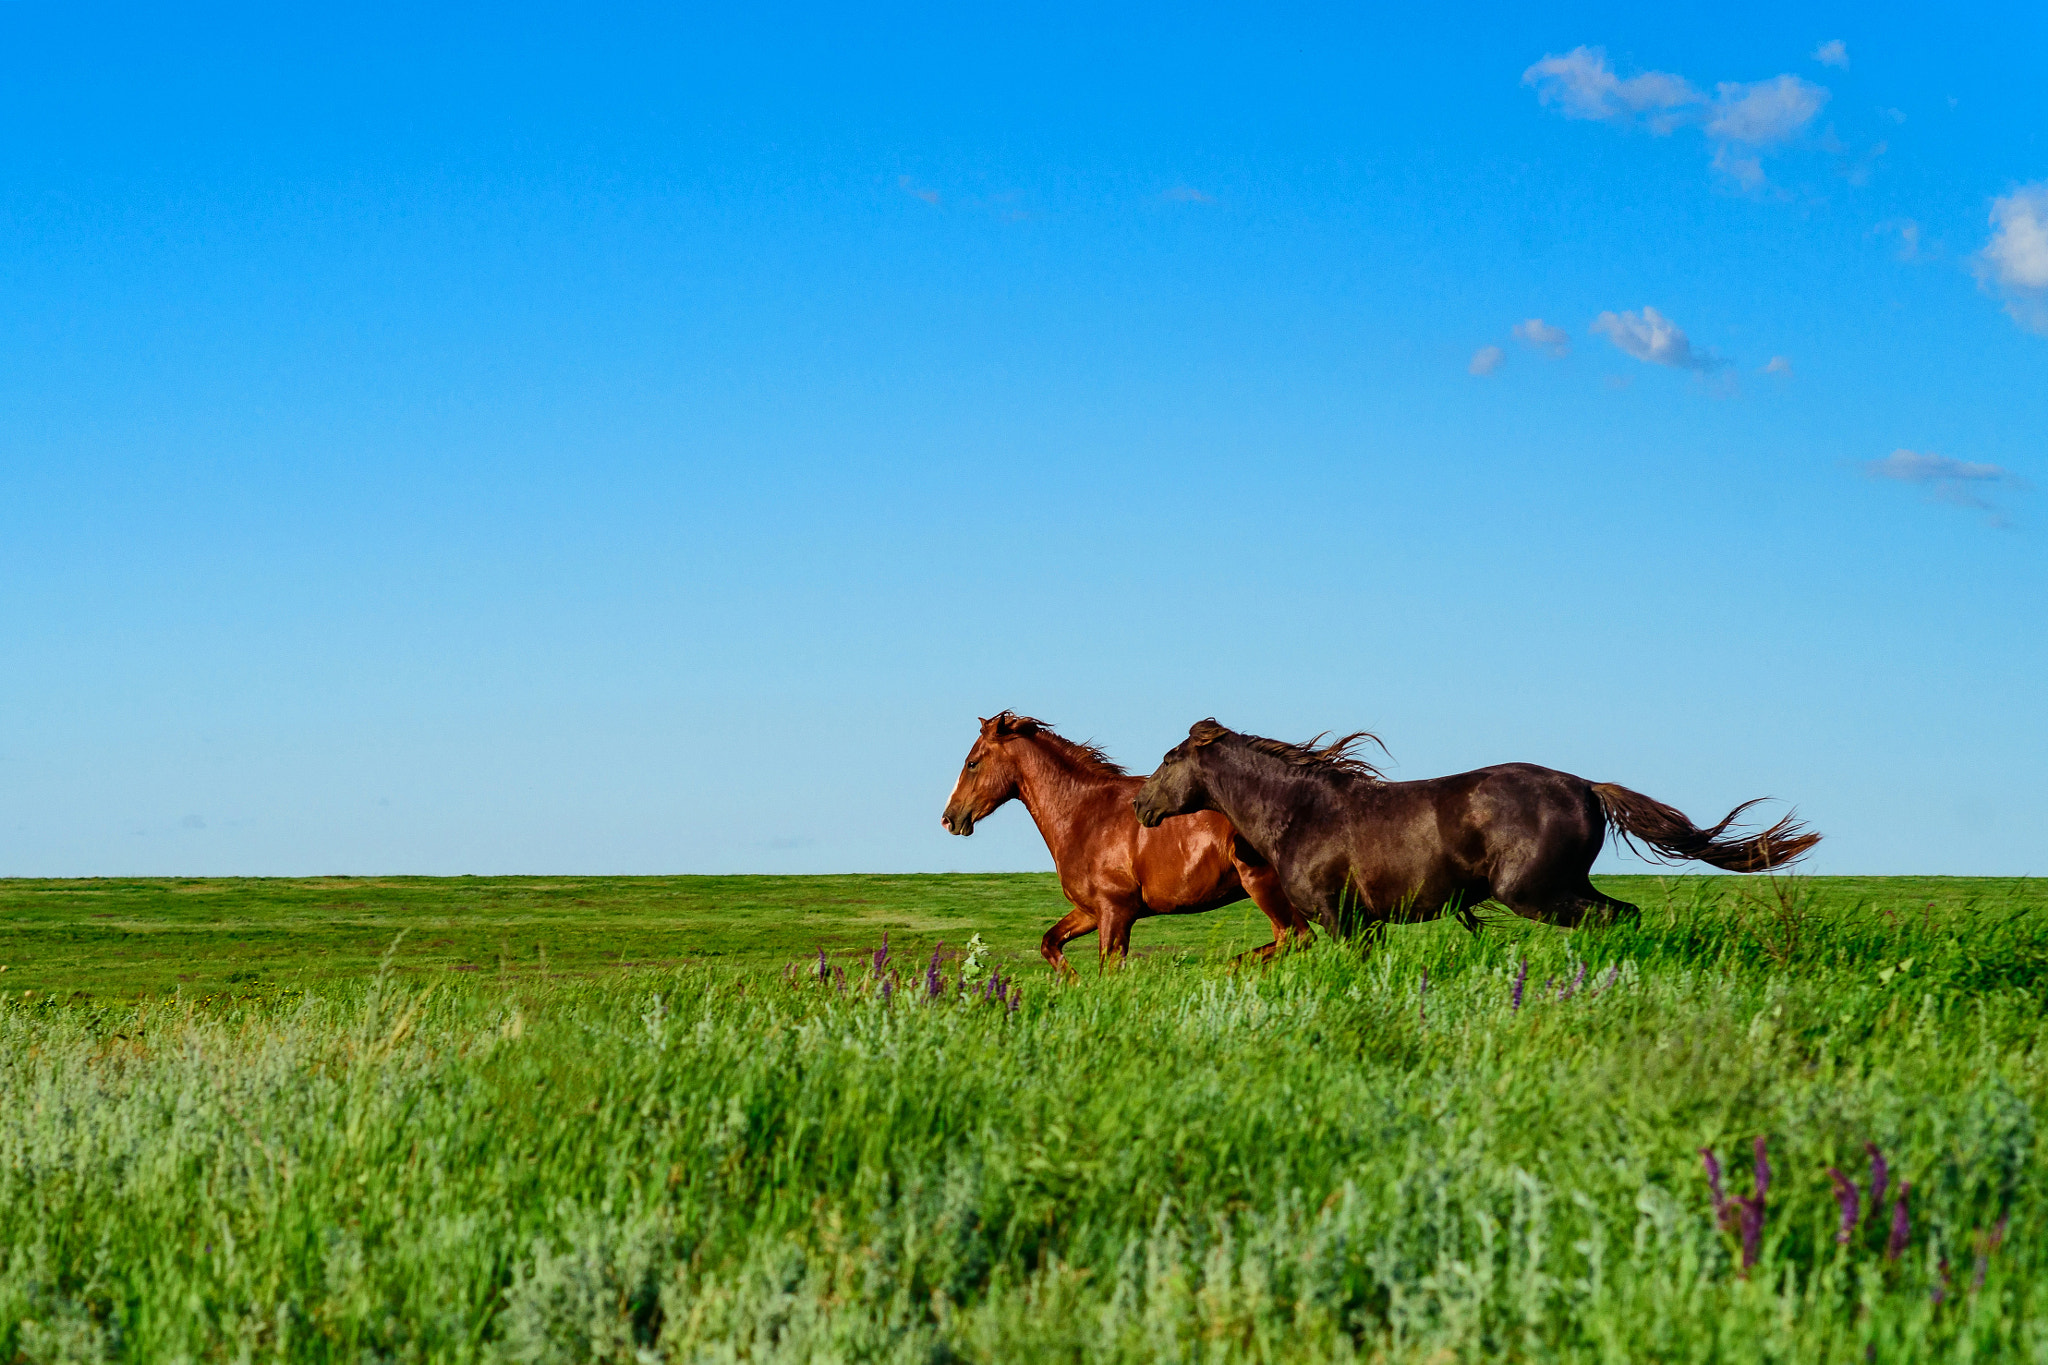 Wild horses galloping in the sunlit meadow